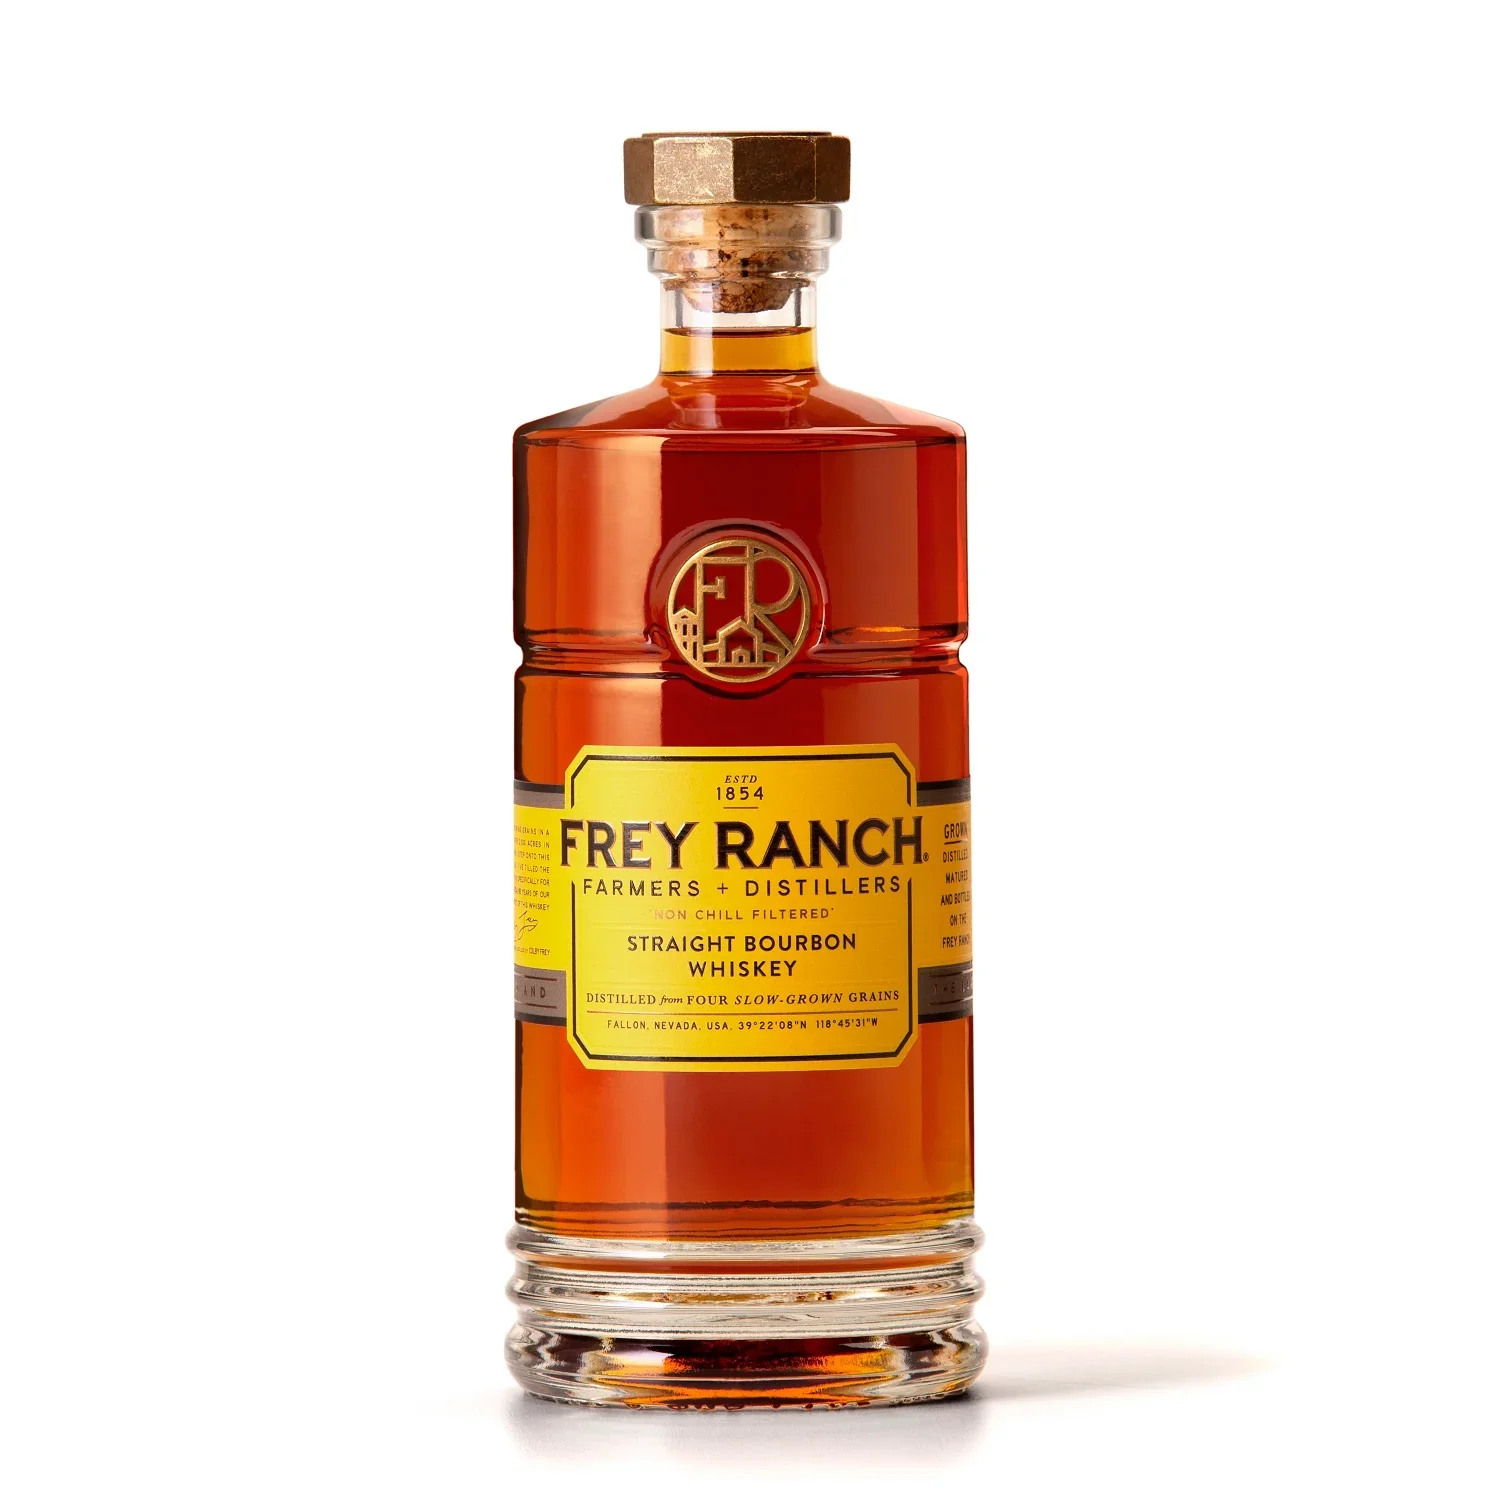 Image of Frey Ranch Straight Bourbon Whiskey